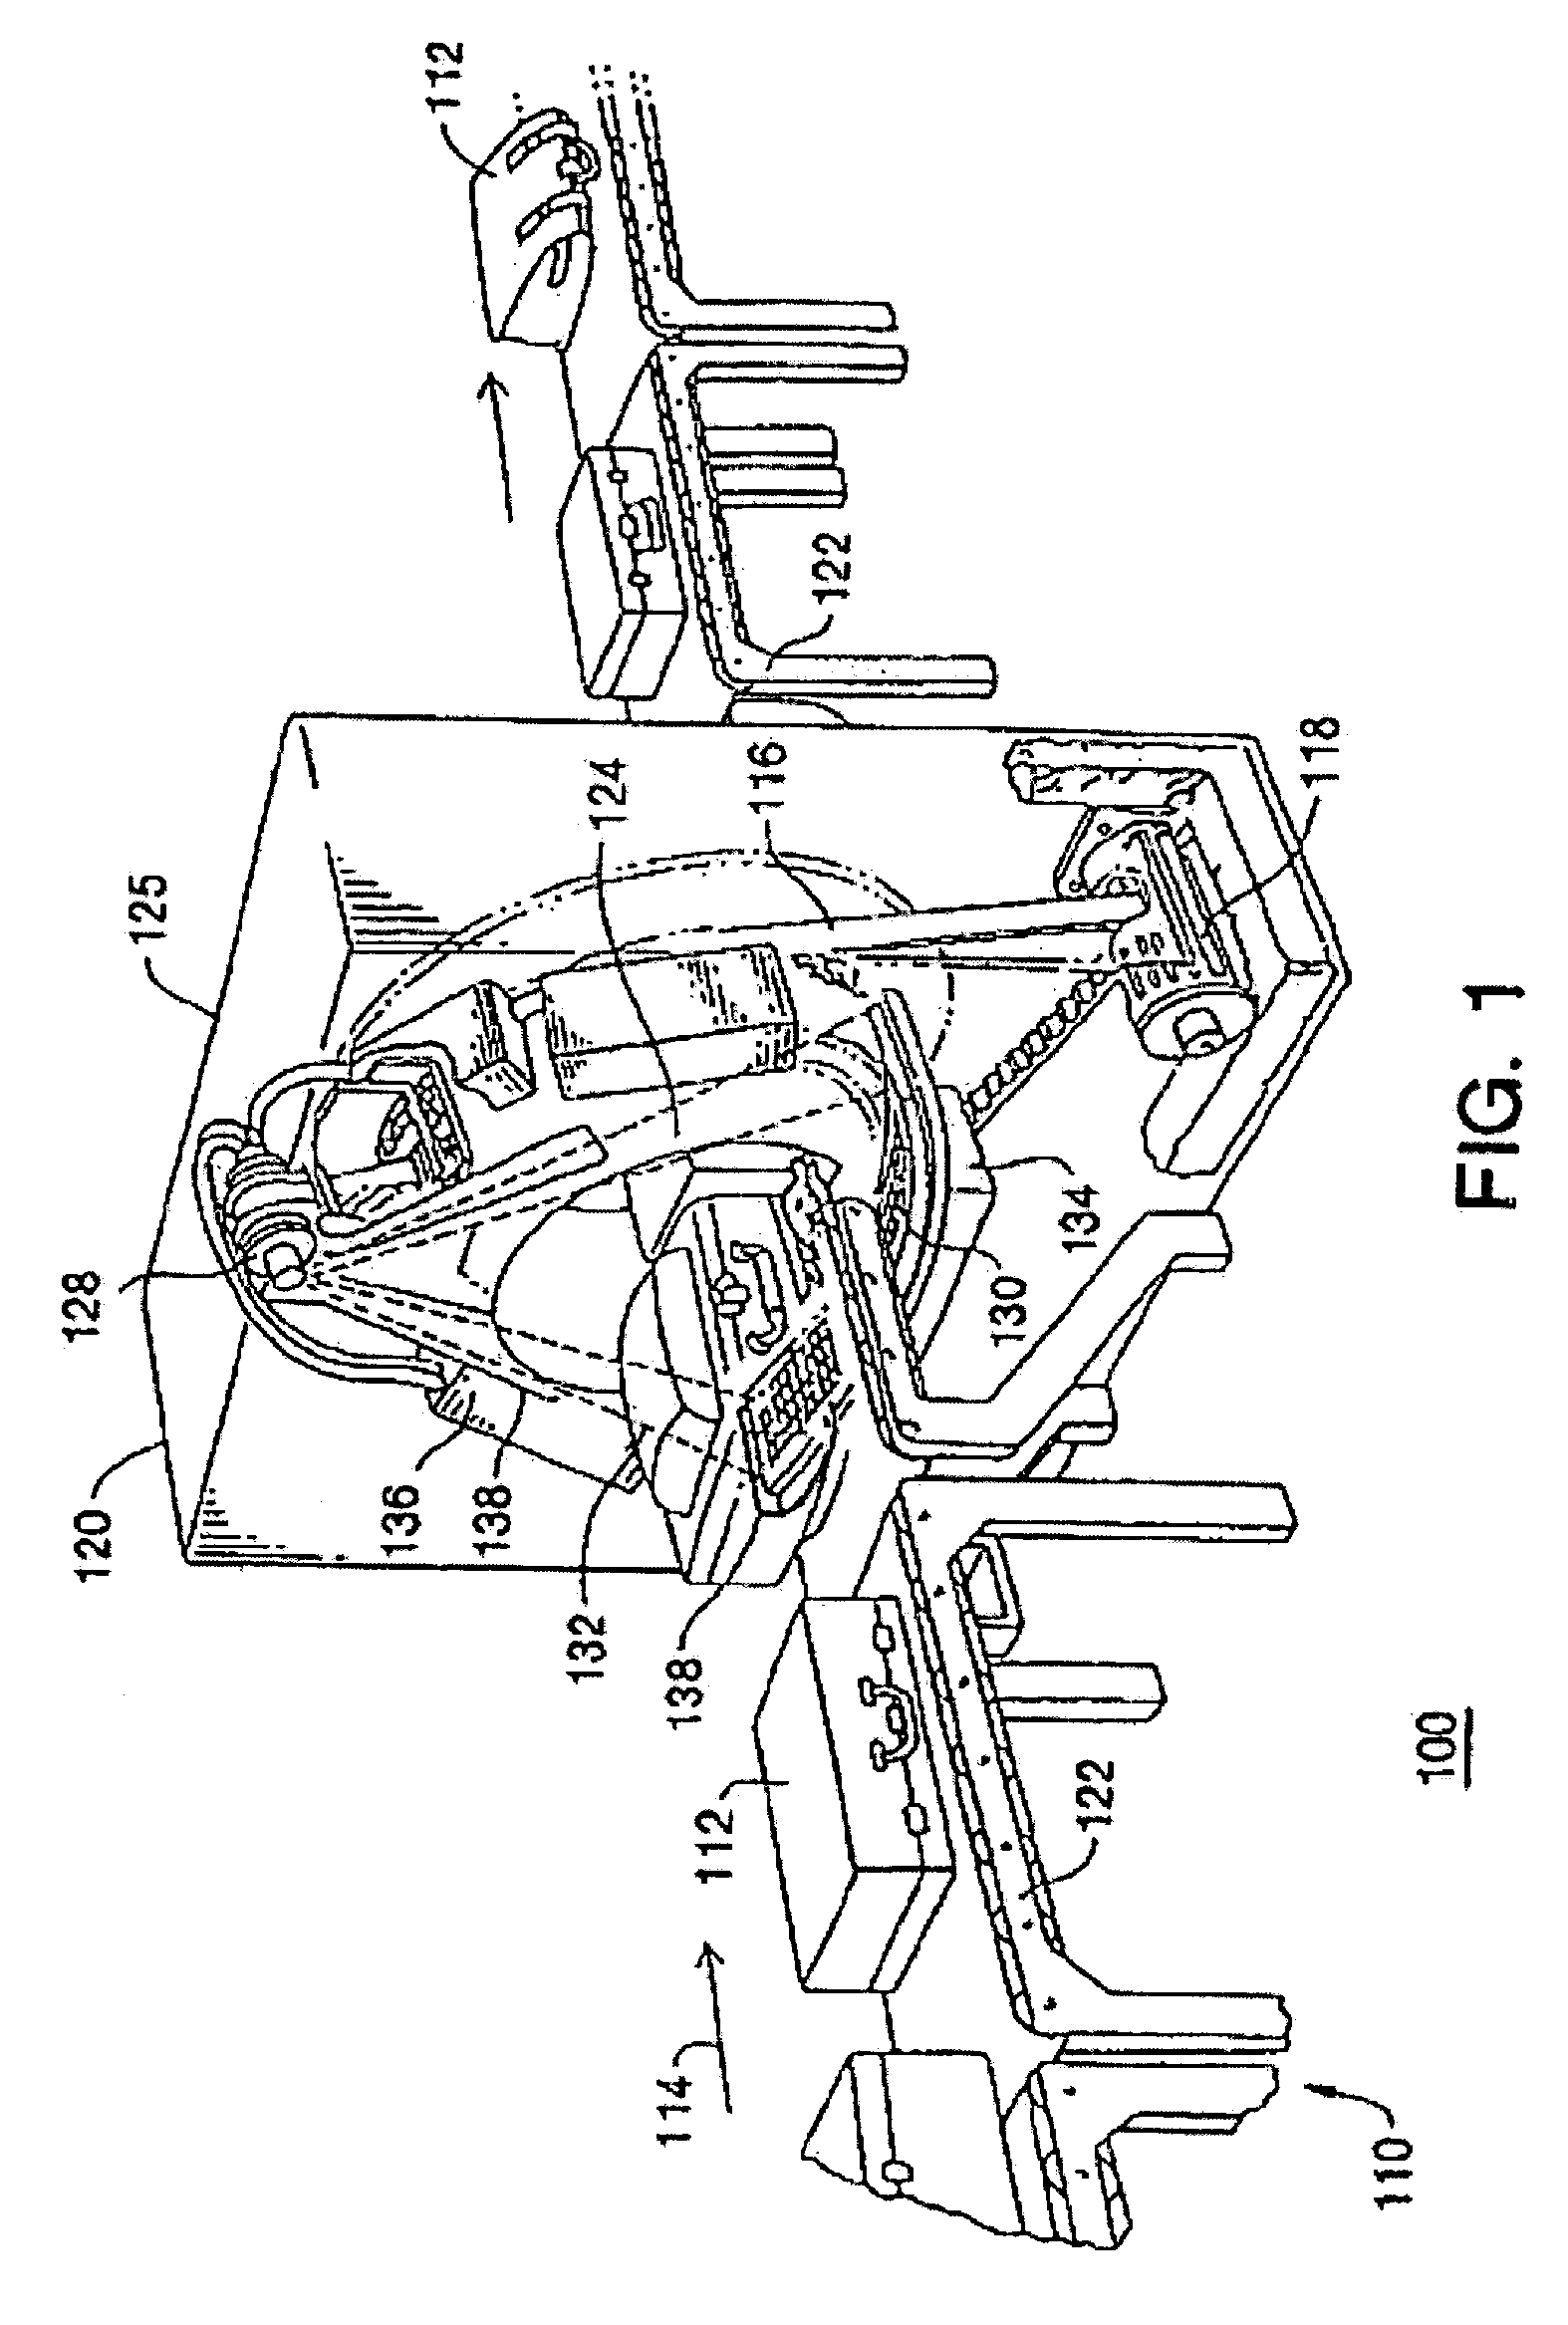 Method of and system for stabilizing high voltage power supply voltages in multi-energy computed tomography